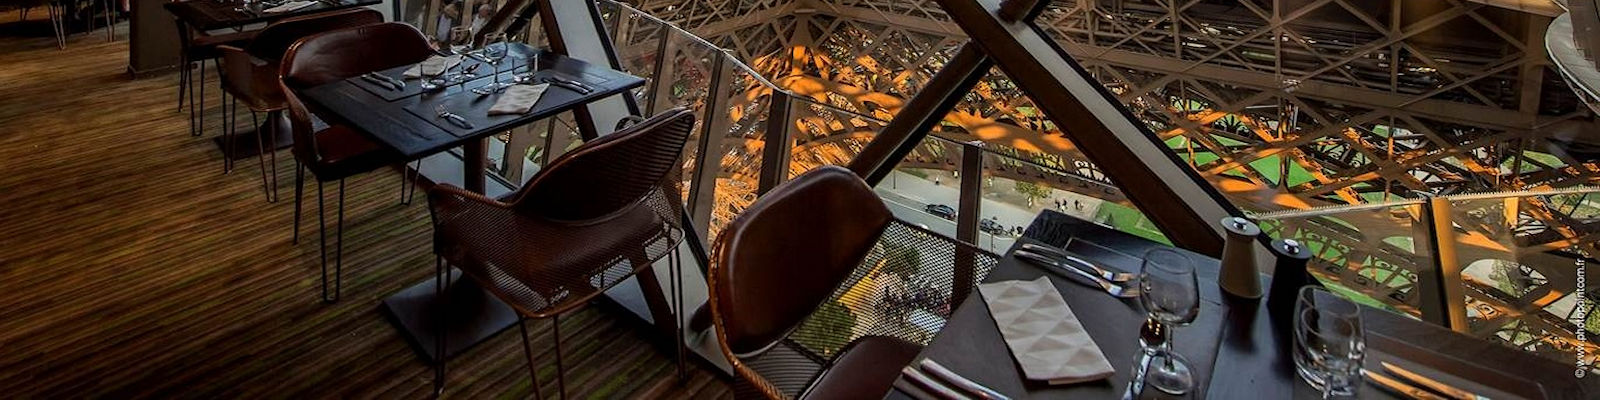 Eiffel Tower dinner and lunch : prices and tickets - PARISCityVISION